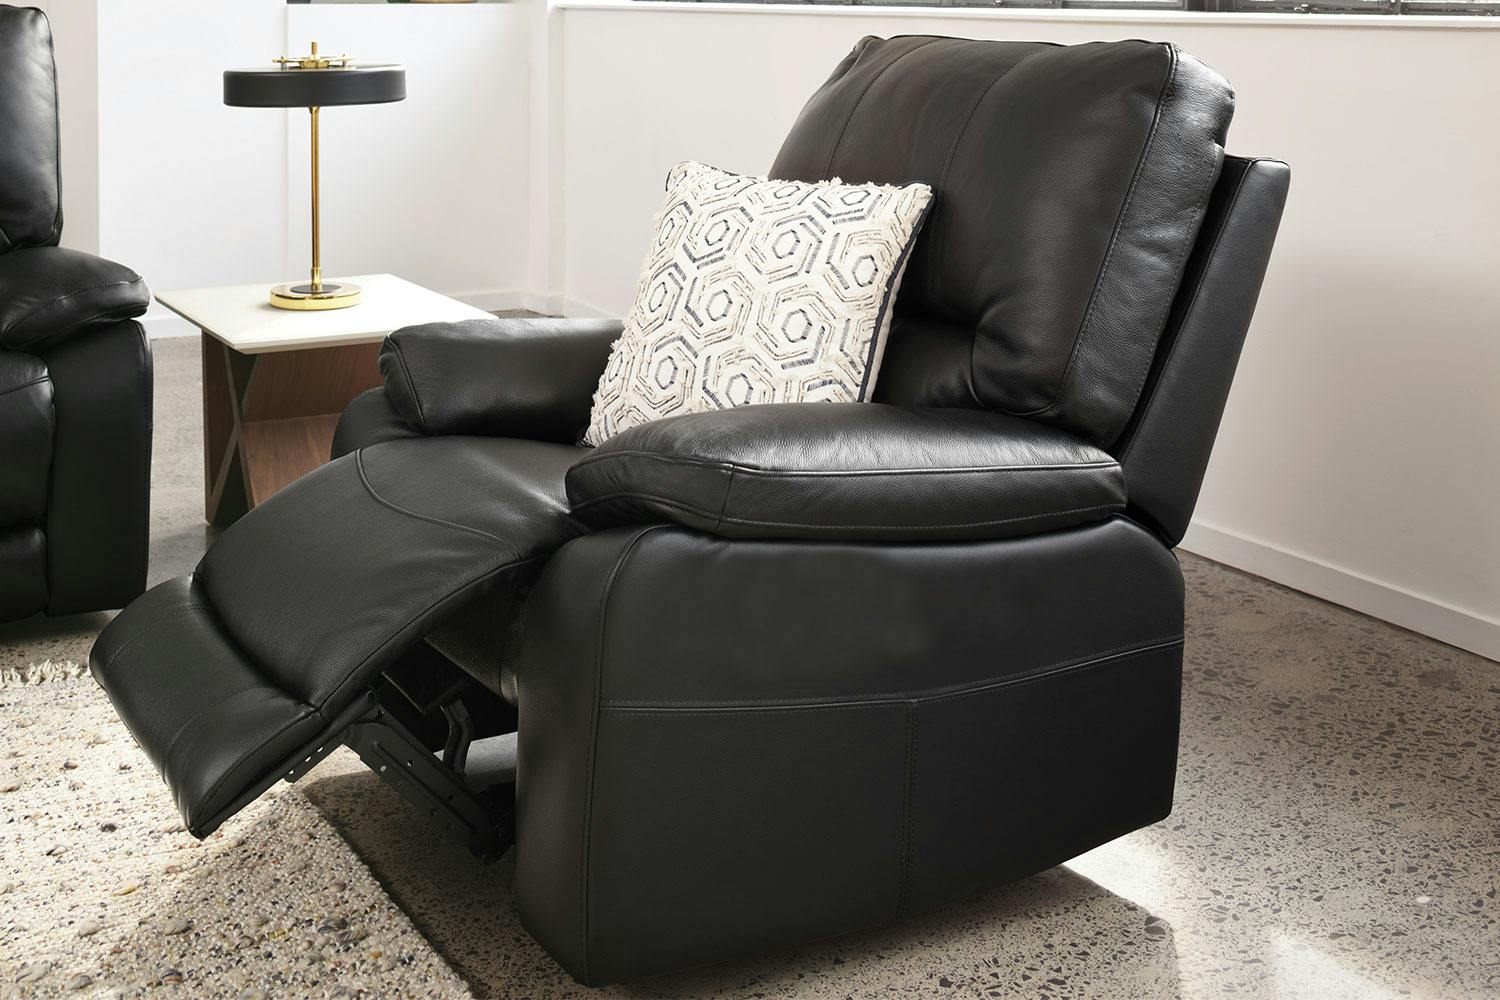 Waterford Leather Recliner Chair